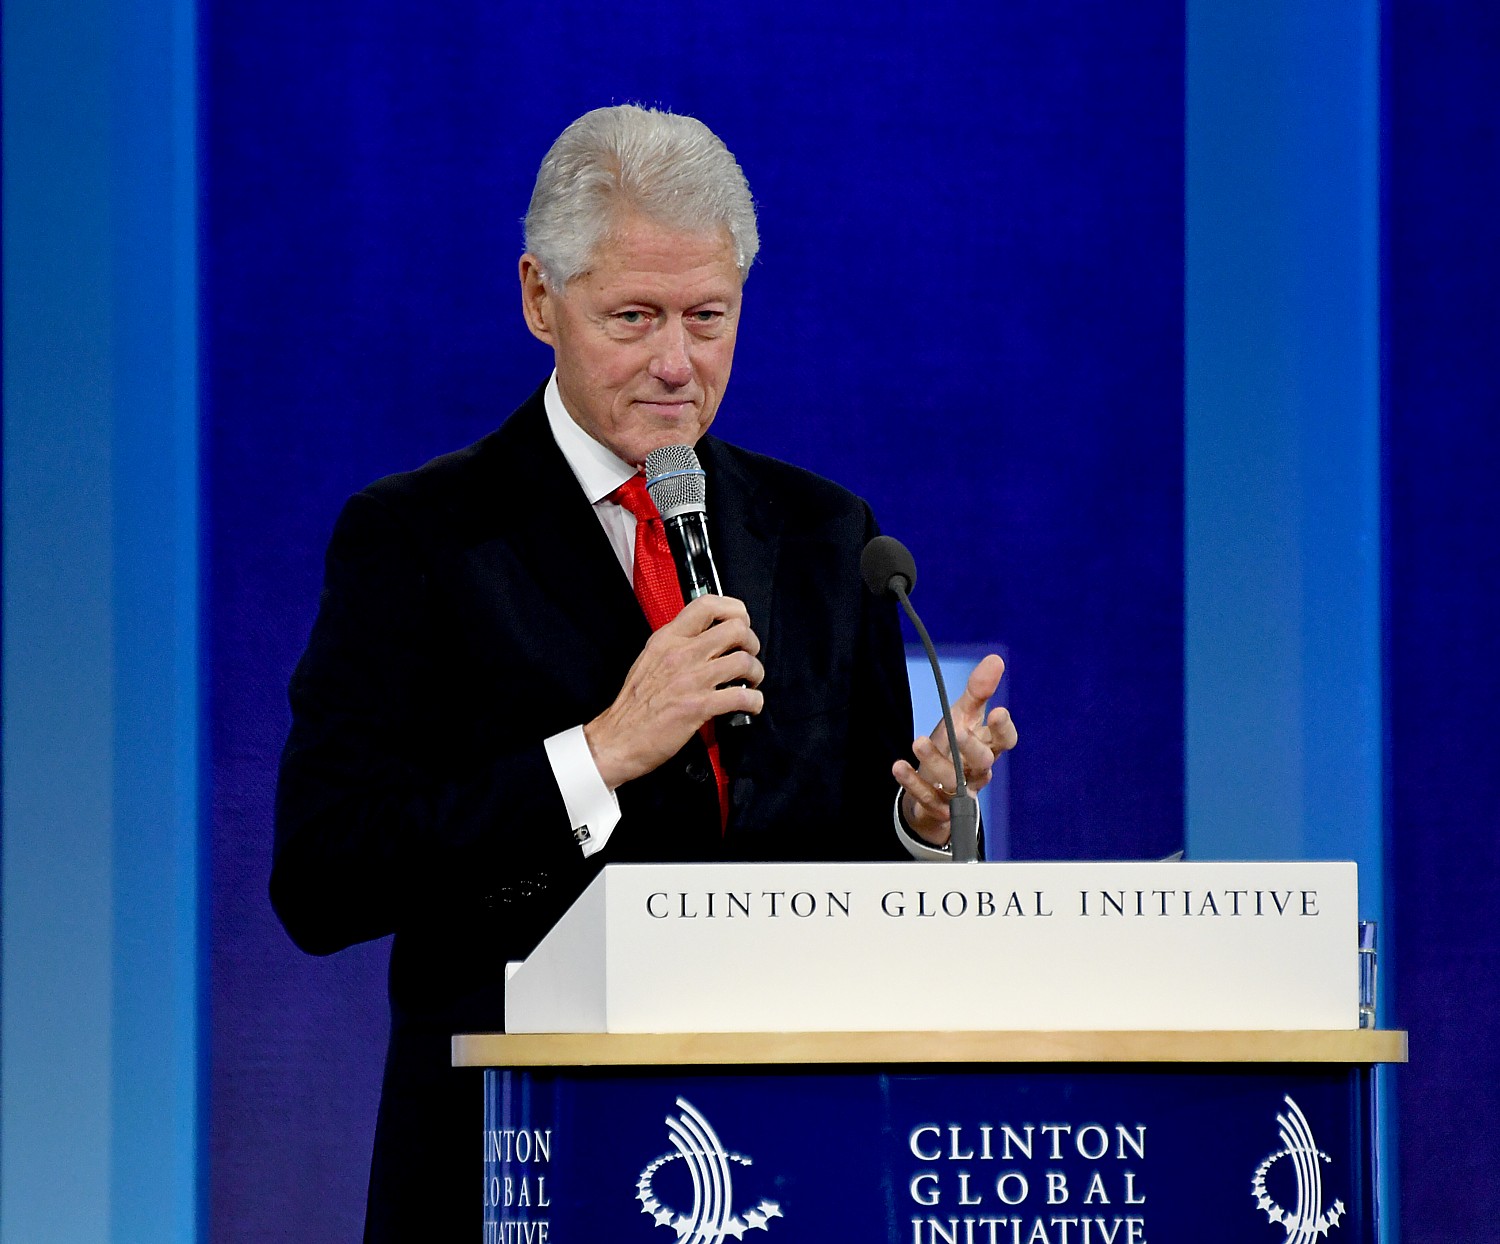 “It has been one of the great honors of my life. You are living proof that good people committed to create cooperation have almost unlimited positive impact to help people today and give our kids better tomorrows. I have spent the last 15 years of my life working to advance that idea,” President Clinton said at the 12th and final Clinton Global Initiative © 2016 Karen Rubin/news-photos-features.com